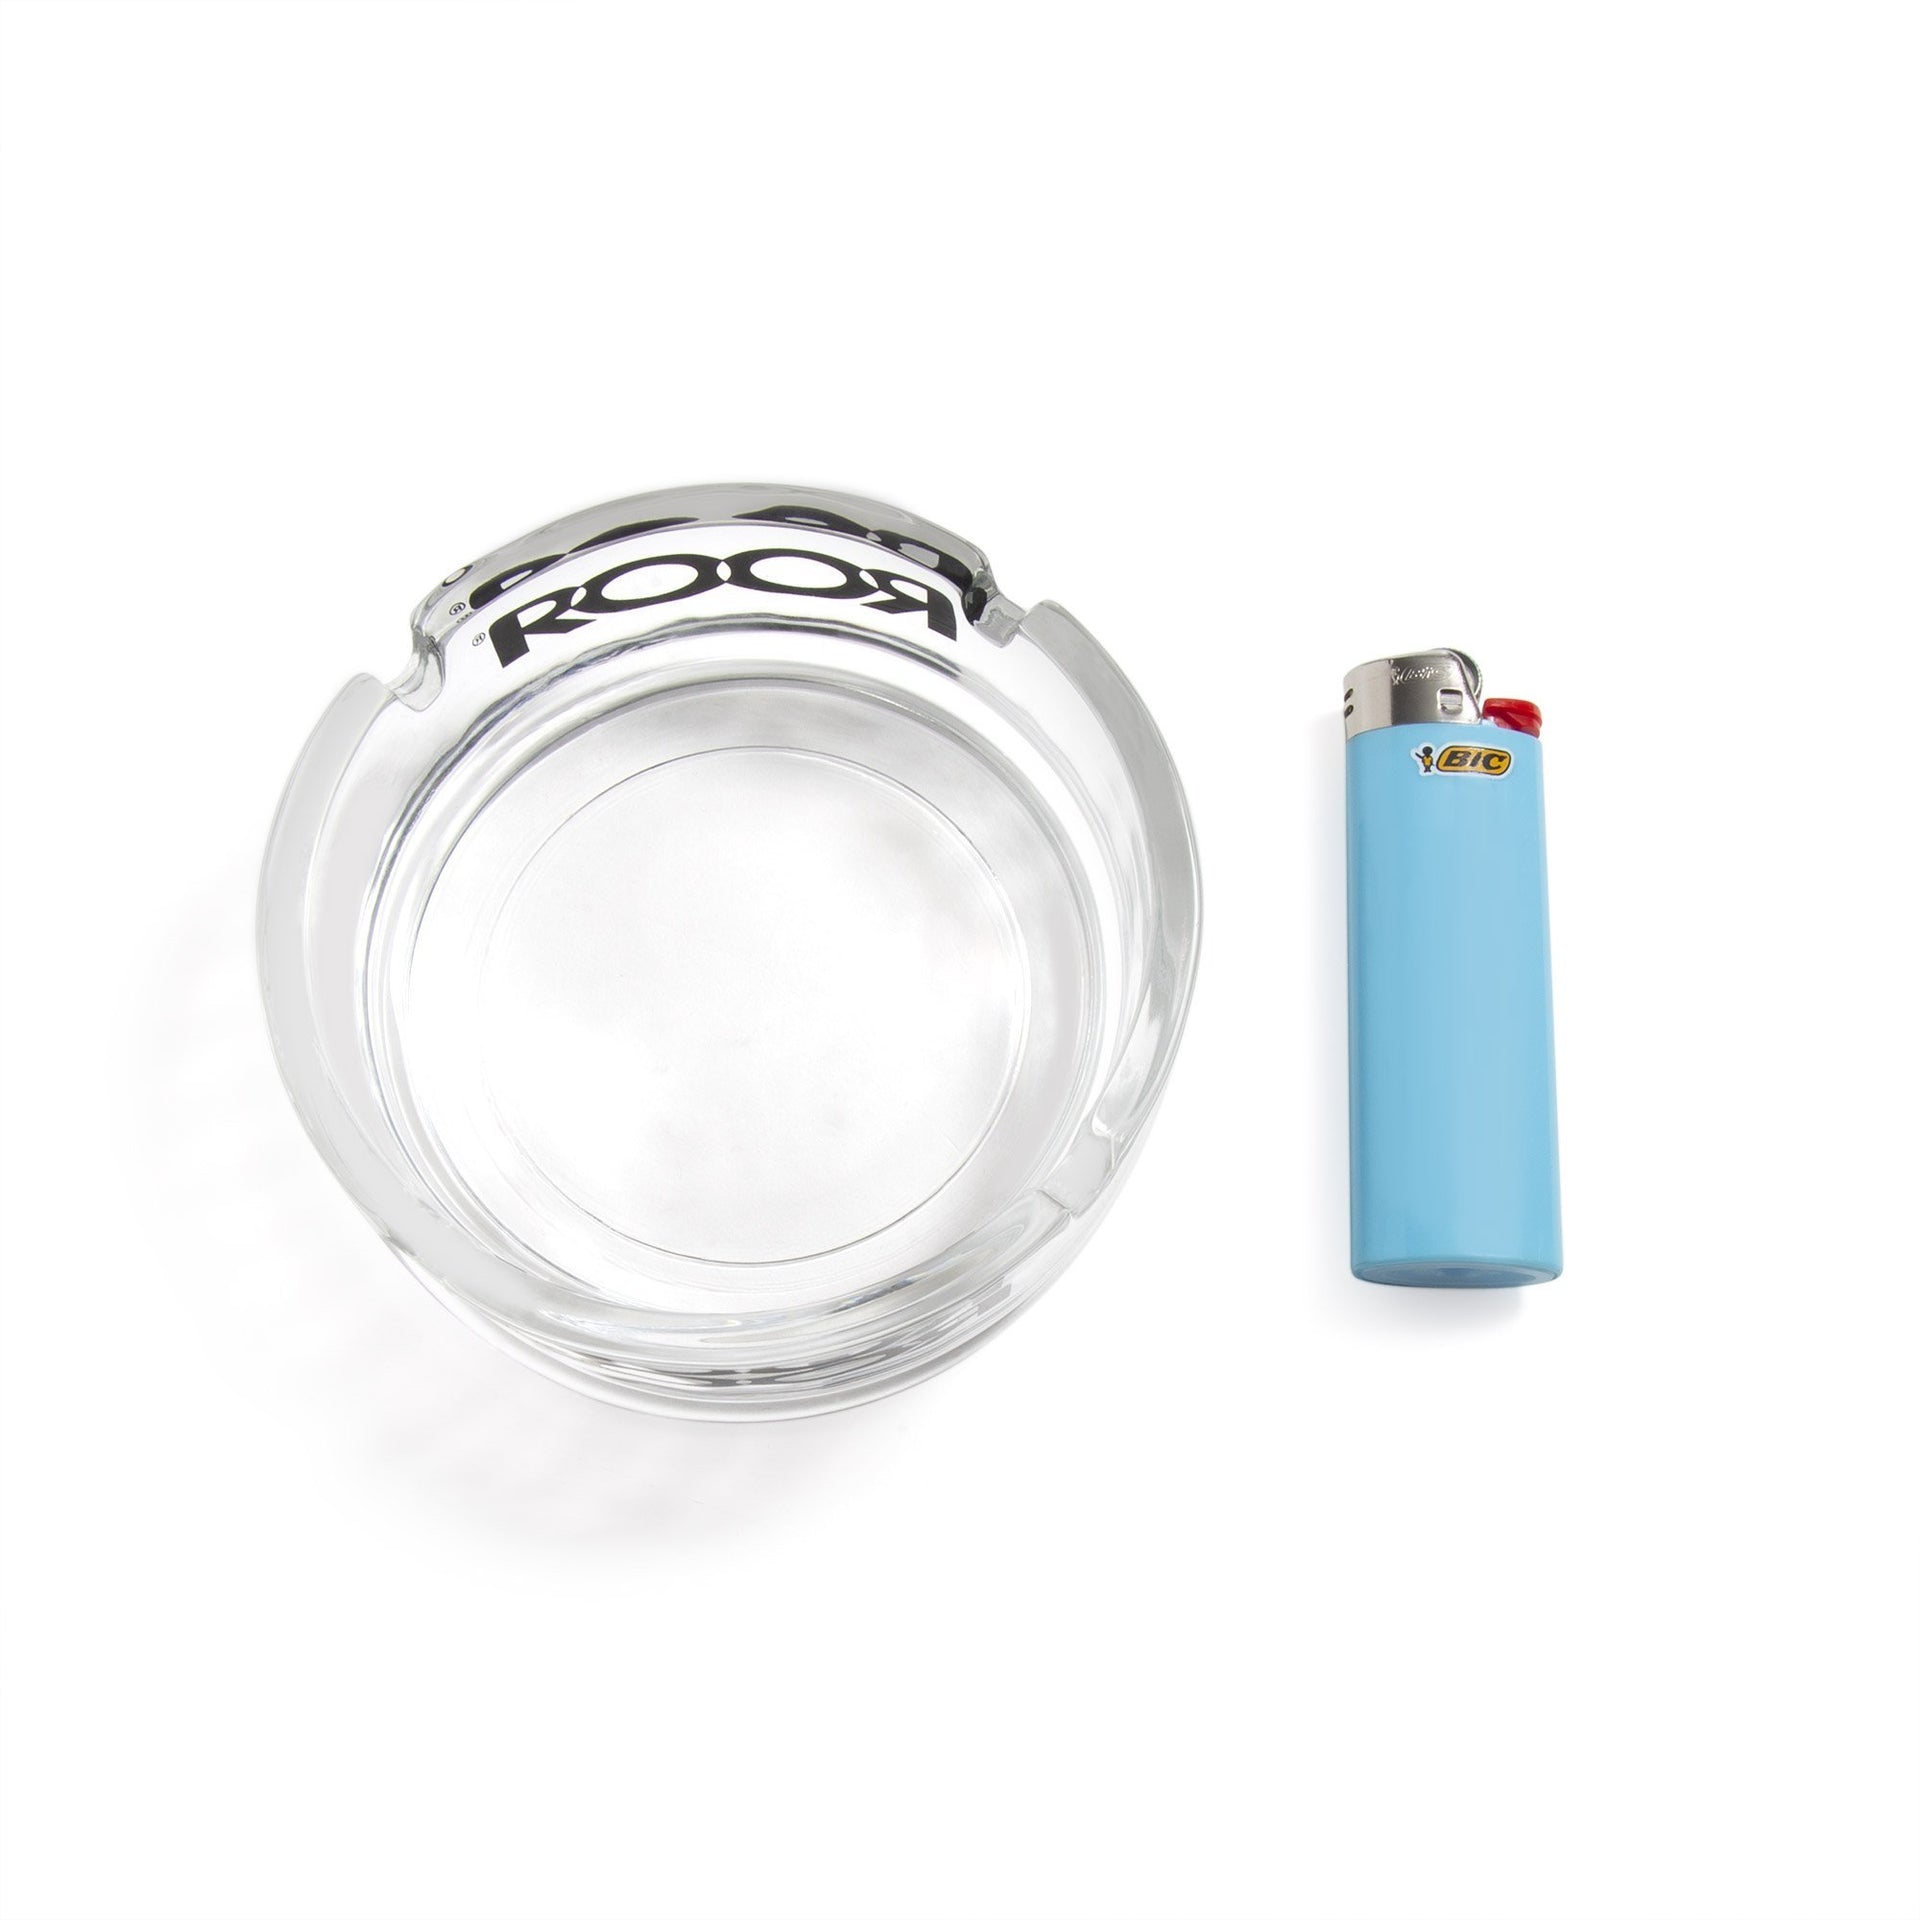 ROOR Glass Ashtray - 420 Science - The most trusted online smoke shop.